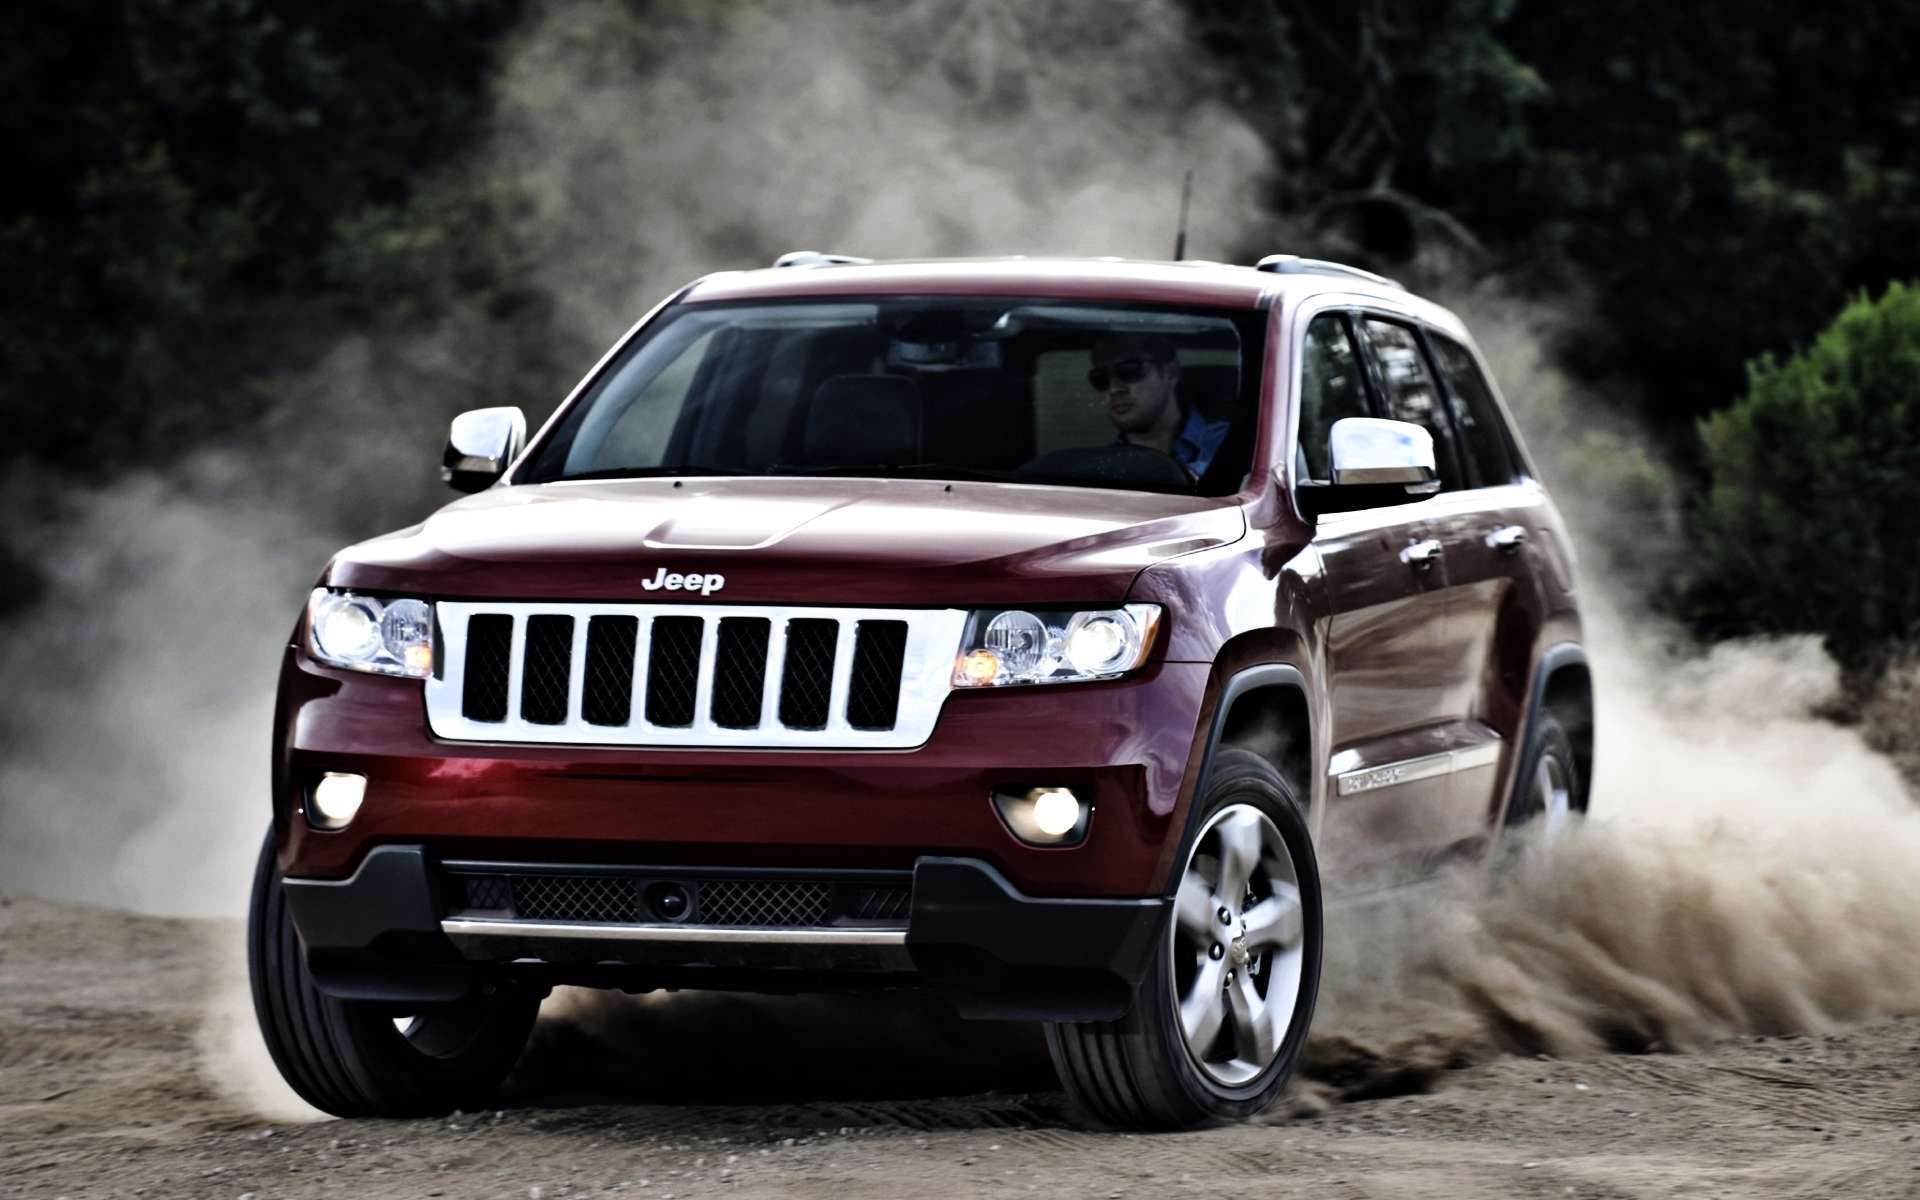 Click here to download in 2K Format — Jeep Grand Cherokee 2K Hd